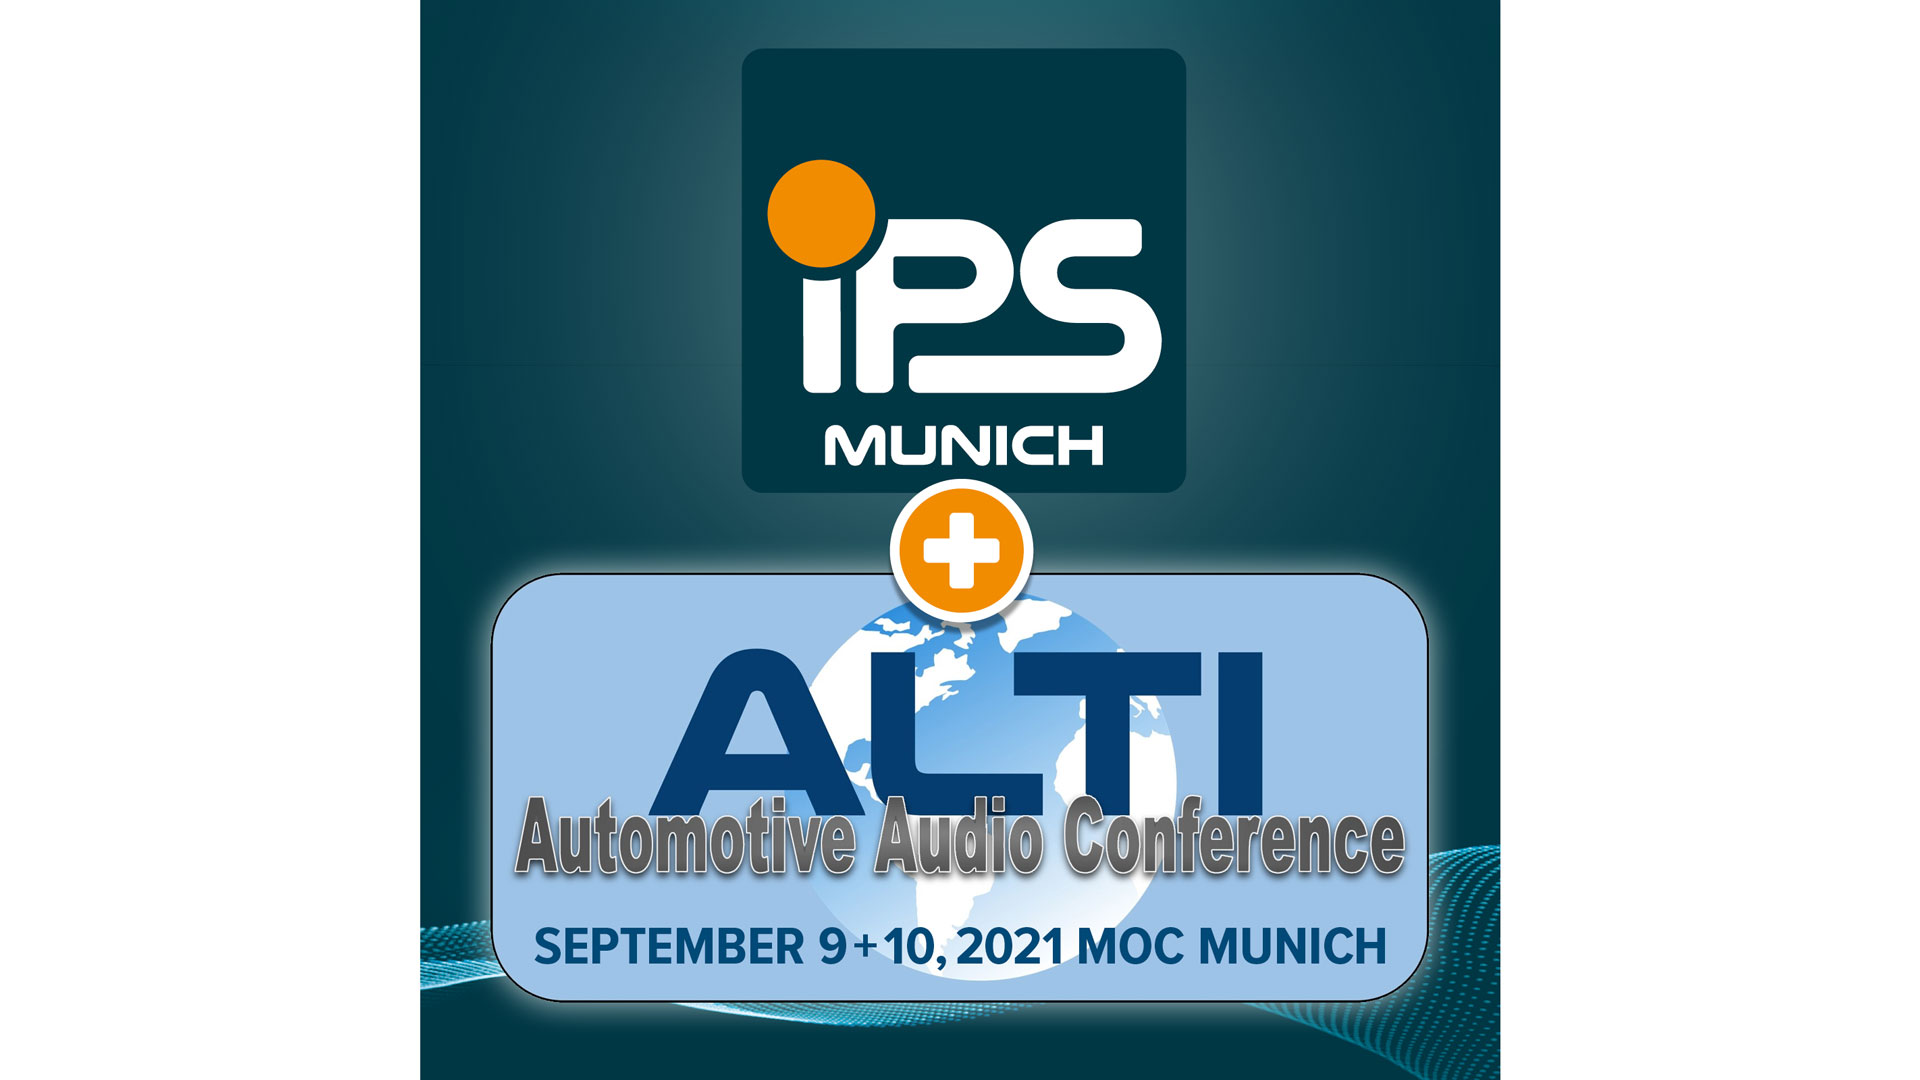 ALTI Conference + IPS (Image Credit: HIGH END SOCIETY Service GmbH, ALTI)